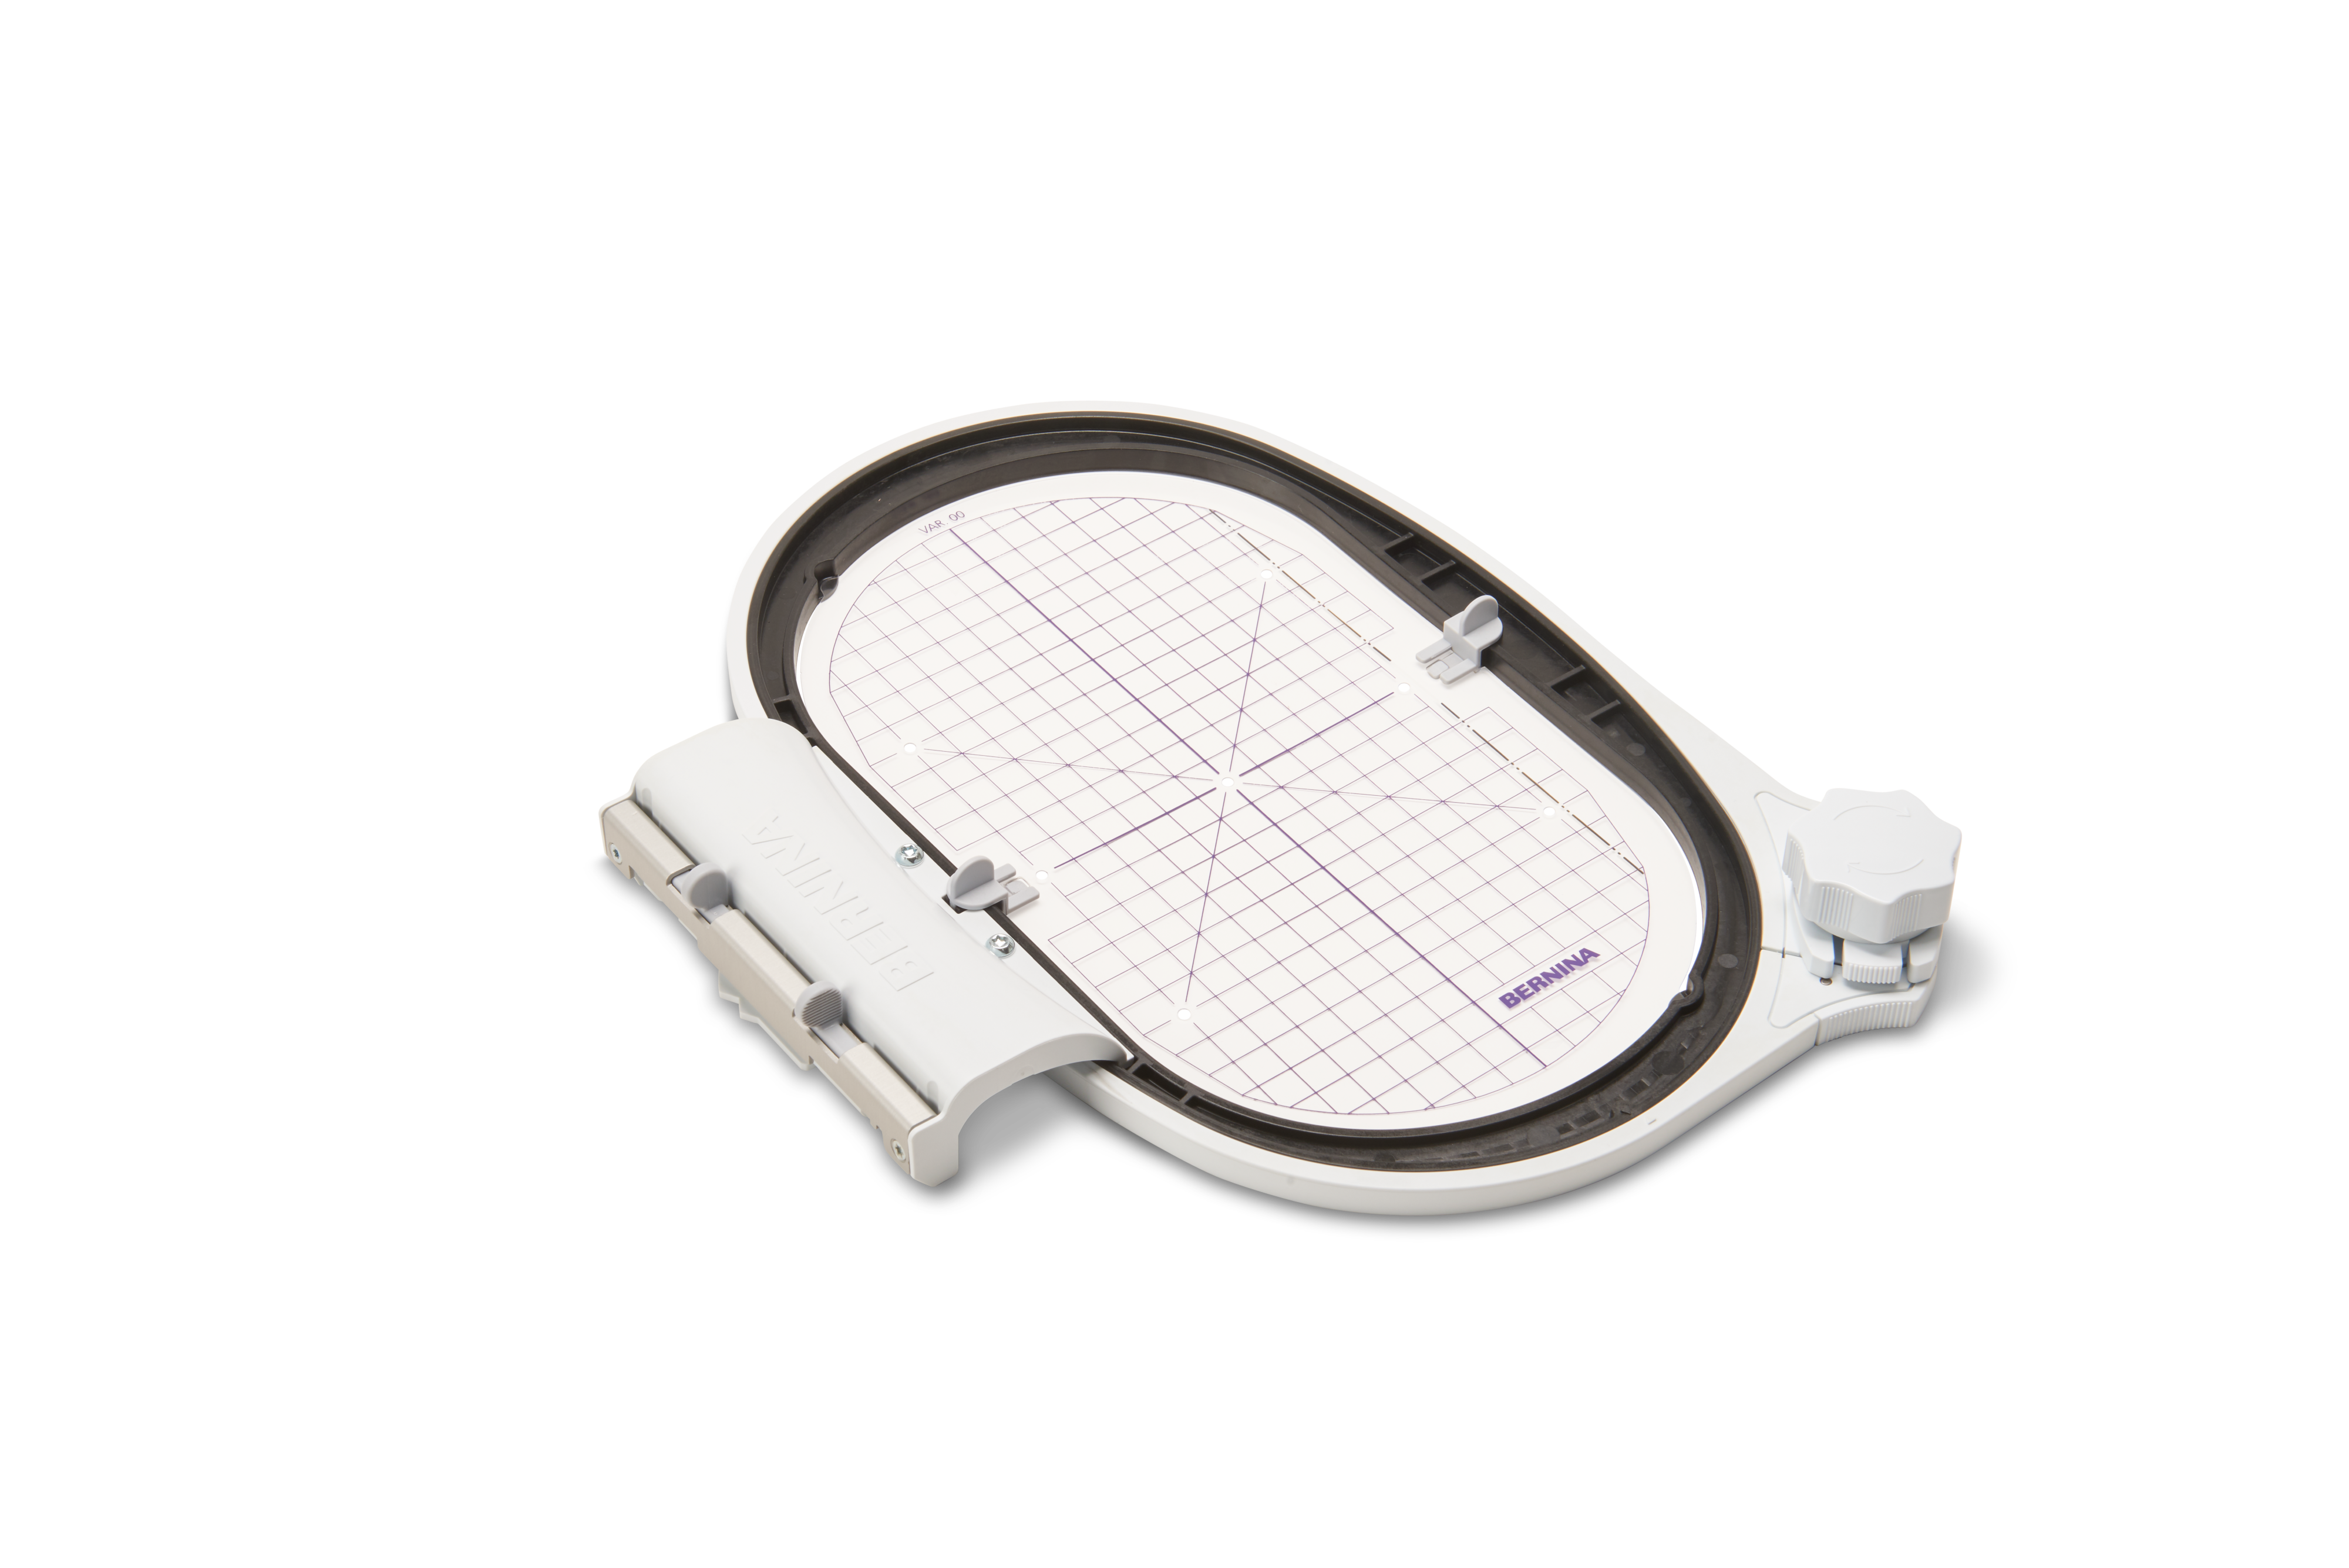 BERNINA Large Freearm Embroidery Hoop 106681.70.00 for Sale at World Weidner